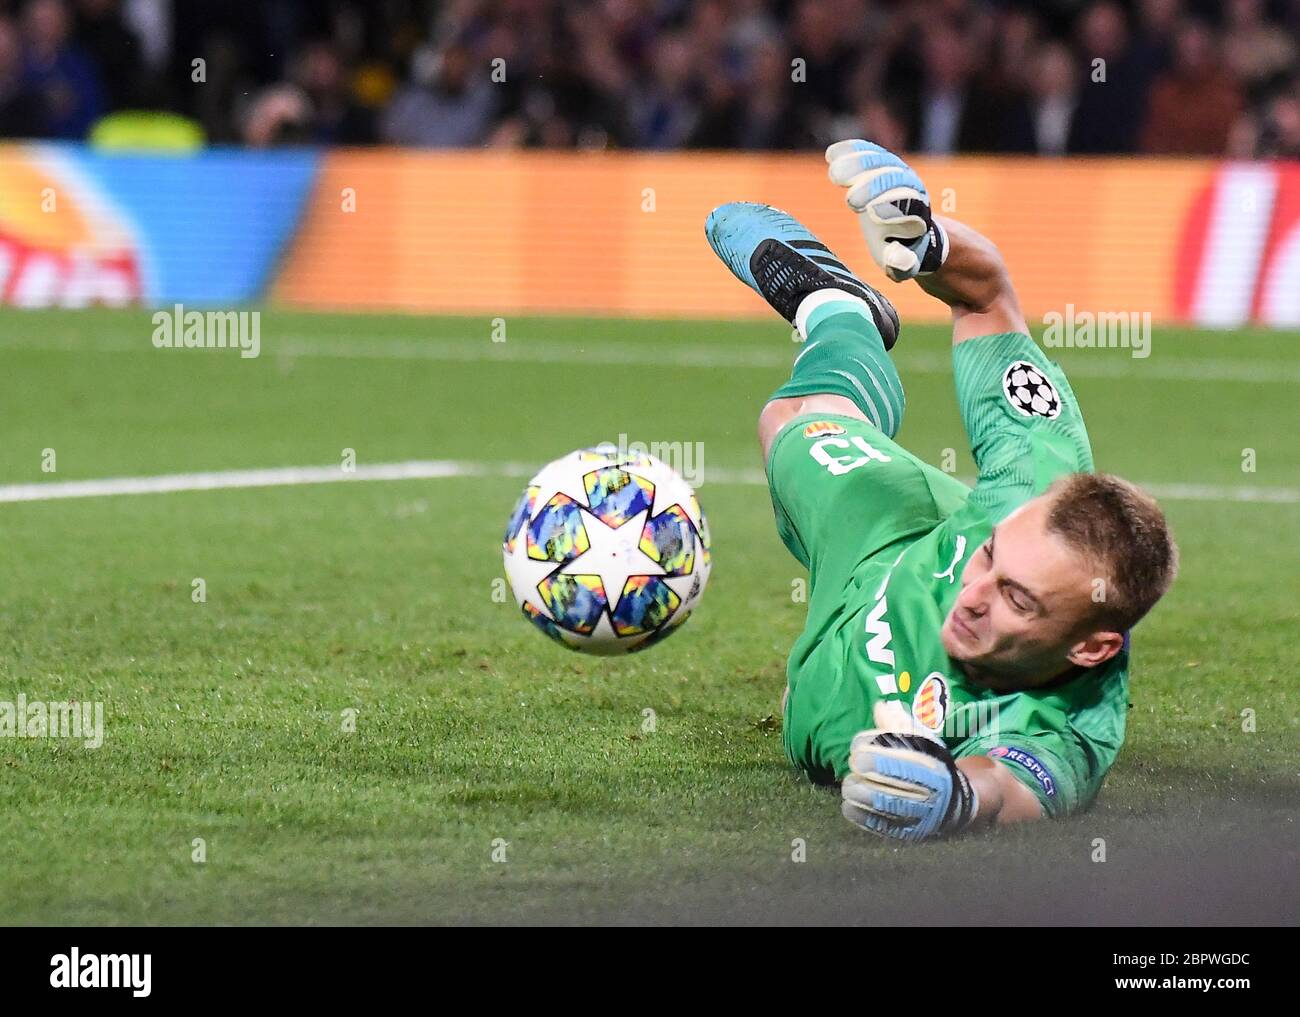 LONDON, ENGLAND - SEPTEMBER 17, 2019: Jasper Cillessen of Valencia dives to save the ball sent from a free-kick during the 2019/20 UEFA Champions League Group H game between Chelsea FC (England) and Valencia CF (Spain) at Stamford Bridge. Stock Photo